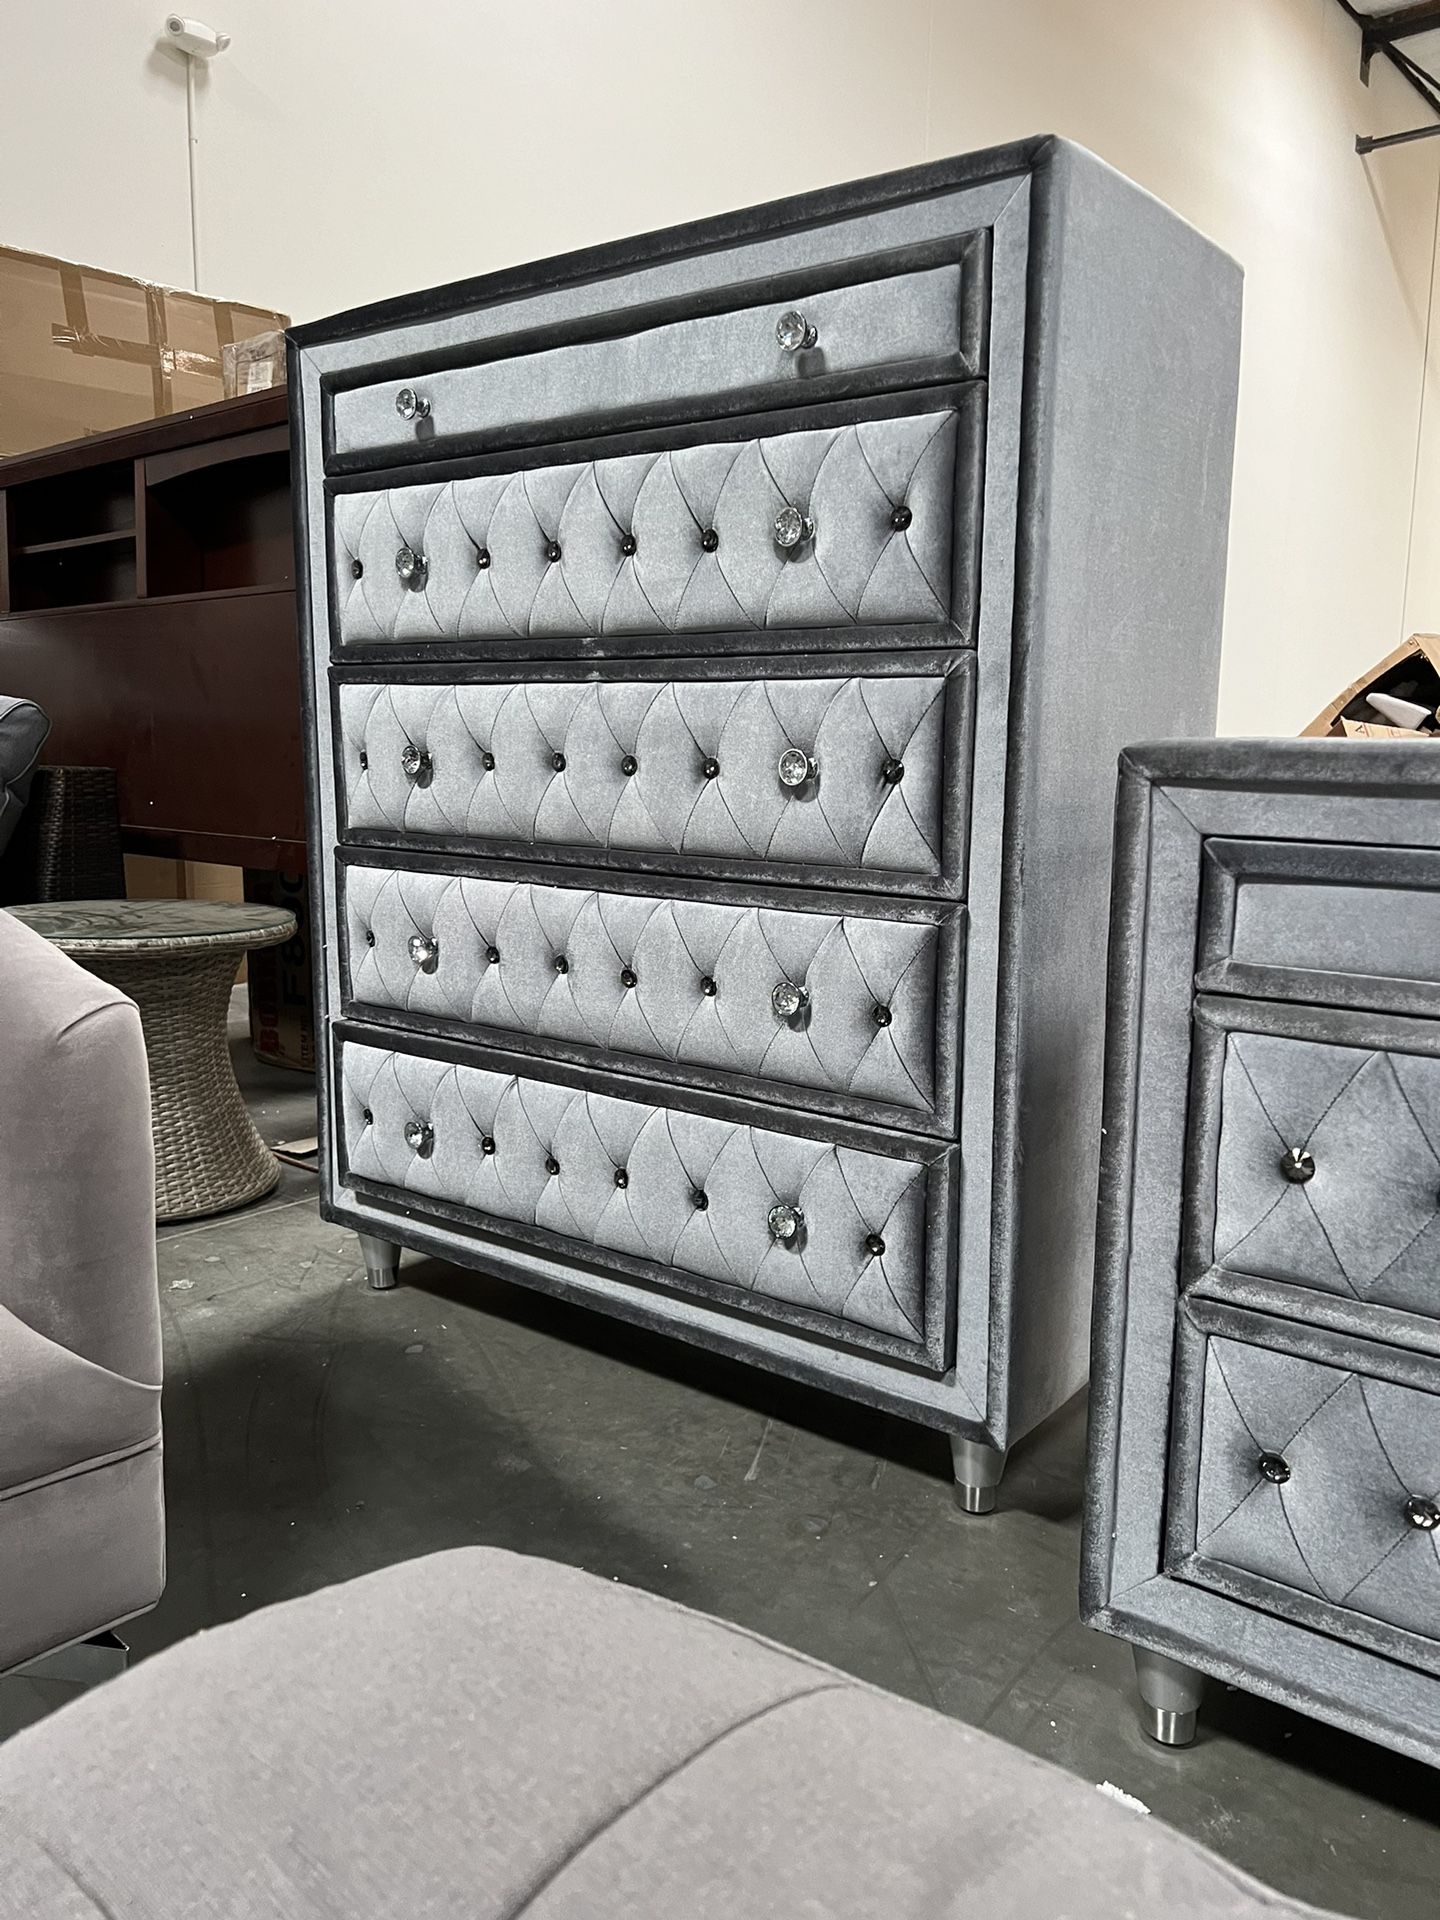 !!New!!! Beautiful Grey 5-Drawer Chest, Premium Upholstered Dresser, Dresser, Chest, Bedroom Furniture, Matching Nightstand Avail